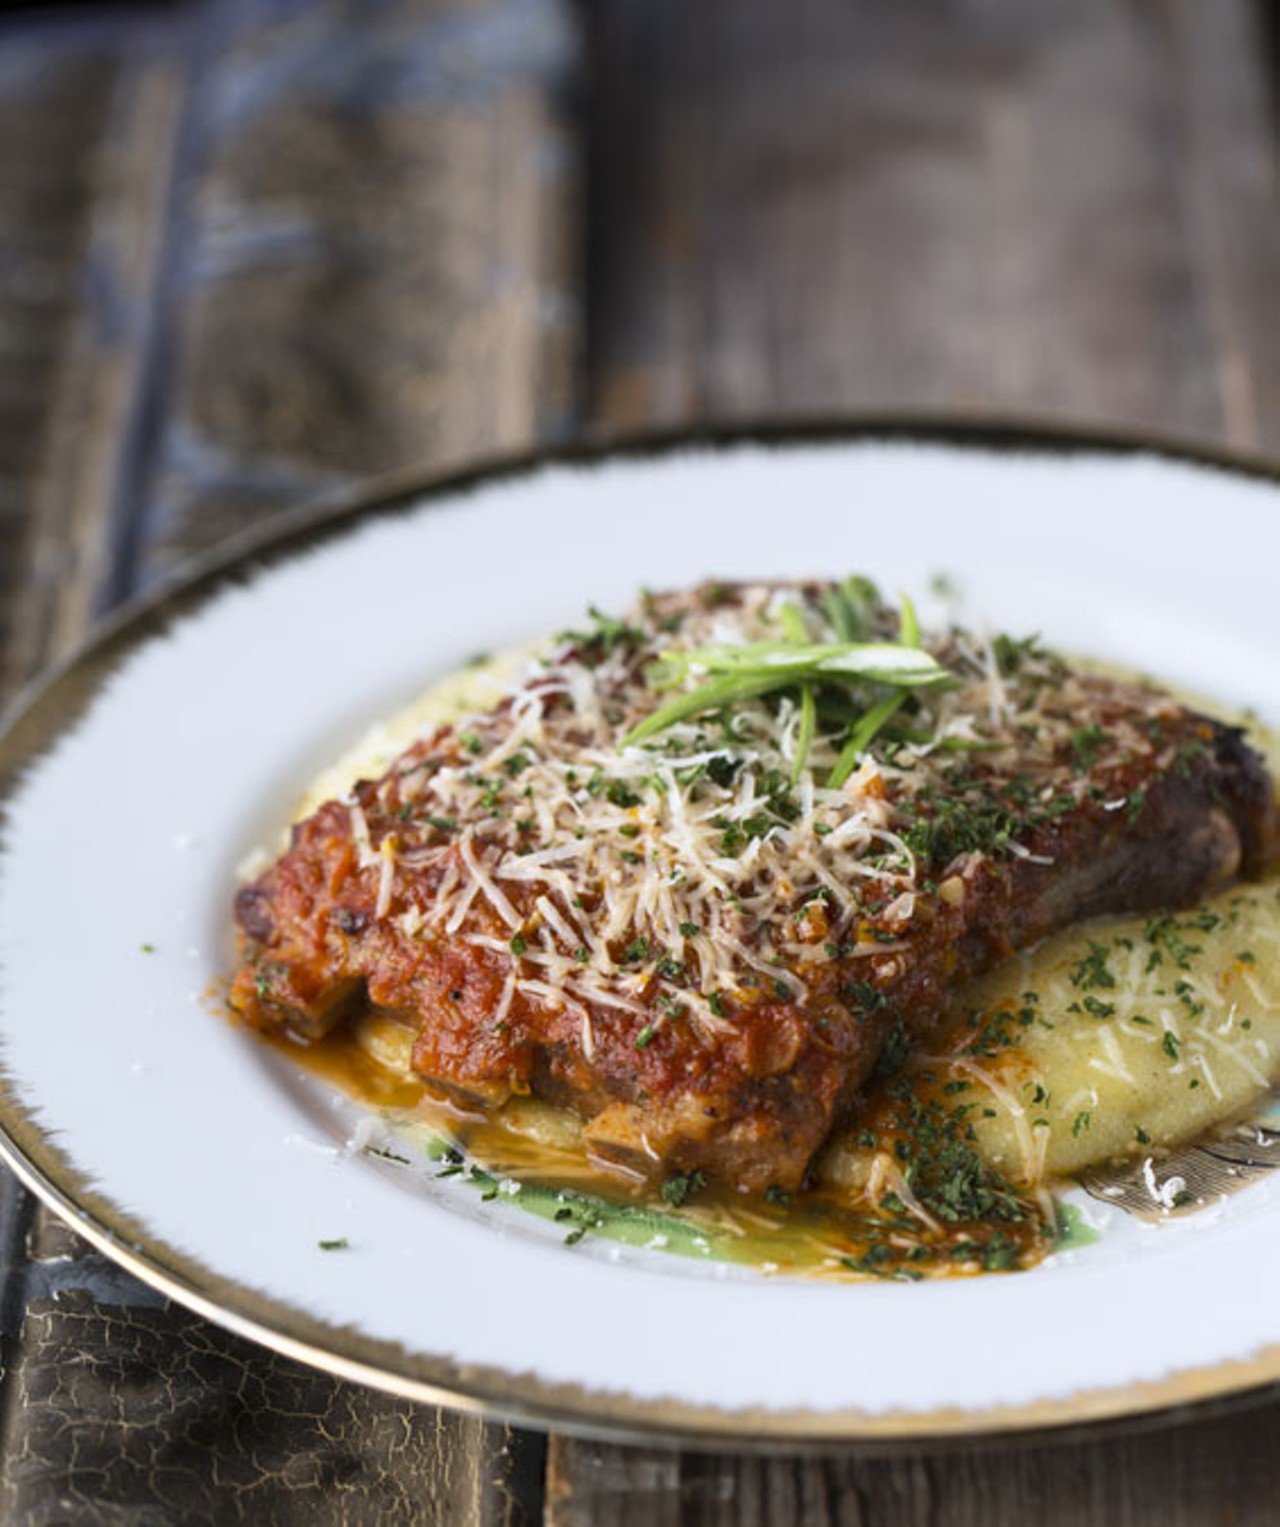 The St. Louis-cut pork ribs are brined overnight and braised in housemade bourbon marinara, then broiled and topped with fresh parmigiano and scallions.